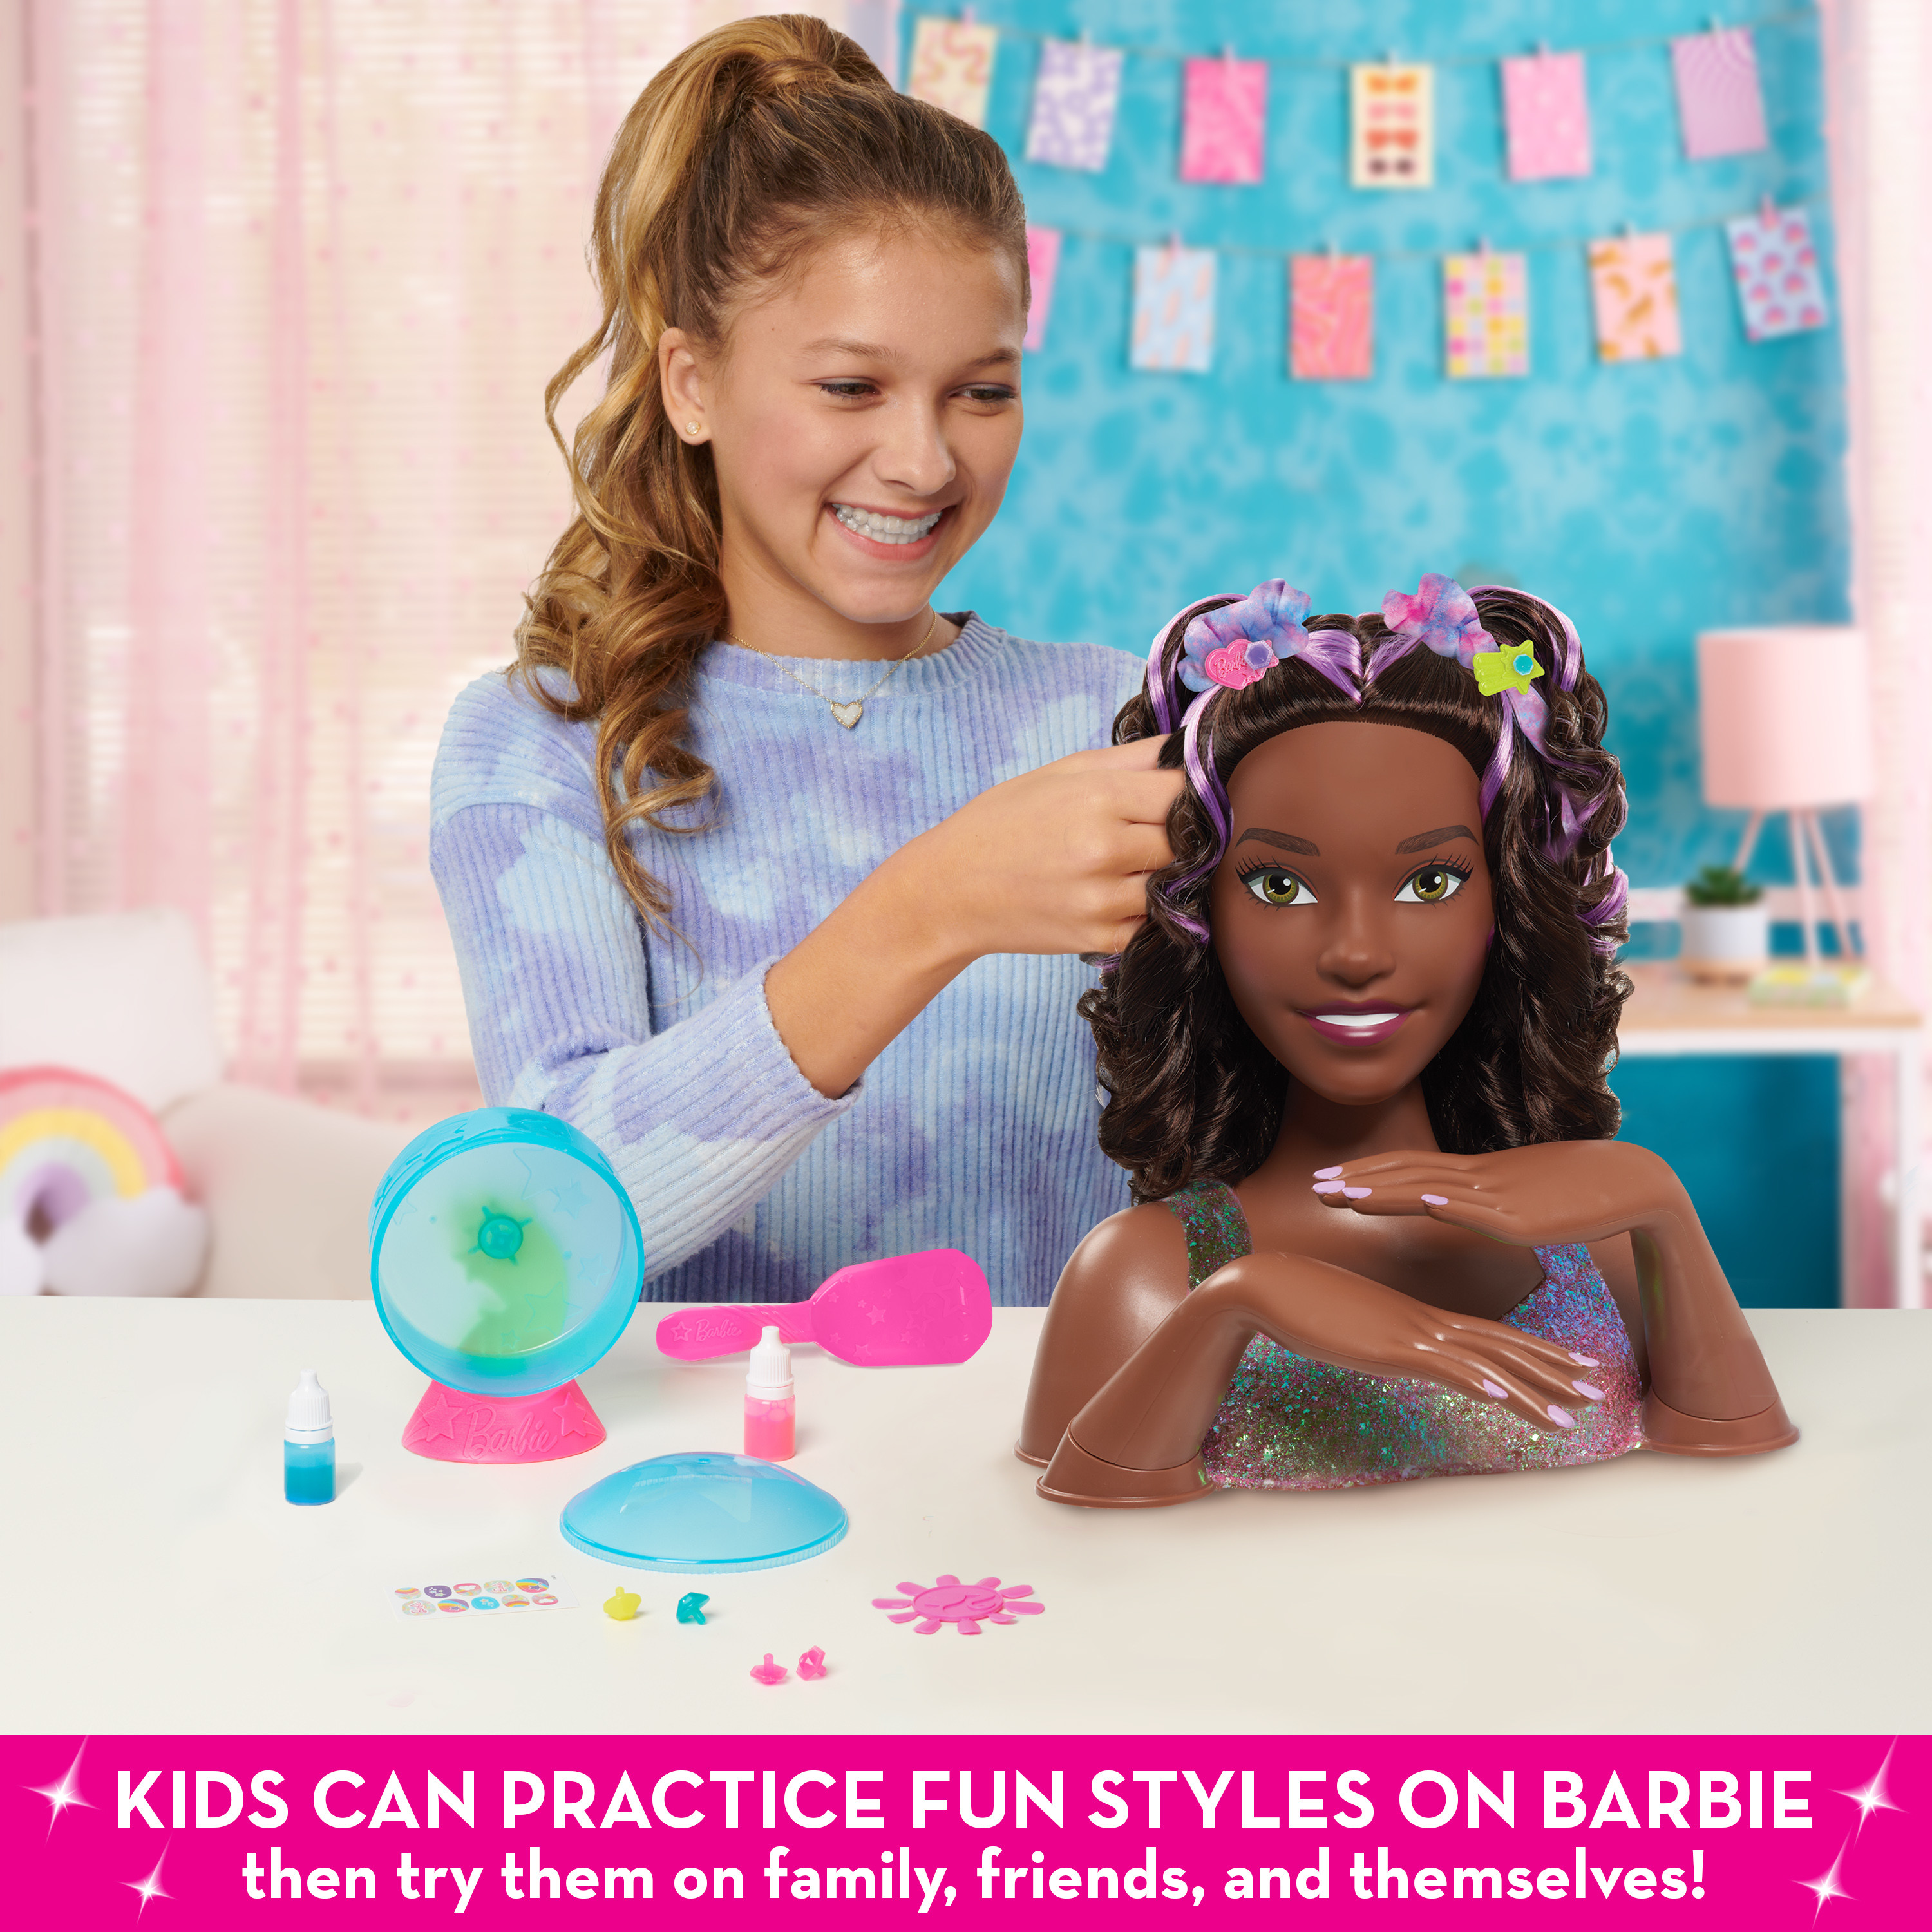 Barbie Tie-Dye Deluxe 21-Piece Styling Head, Black Hair, Includes 2 Non-Toxic Dye Colors,  Kids Toys for Ages 3 Up, Gifts and Presents - image 4 of 9